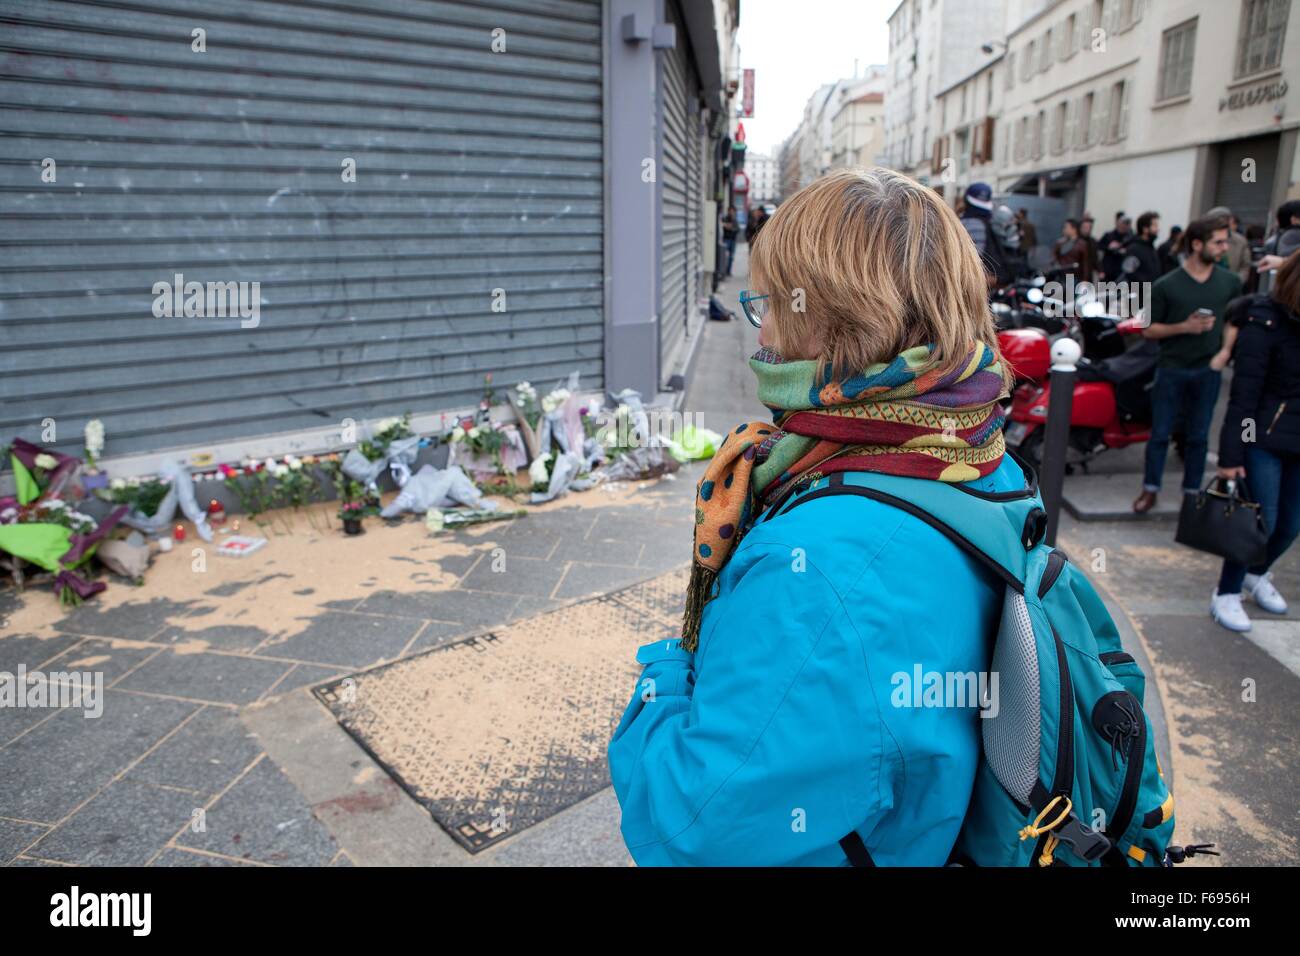 Paris Terrorist attacks, 13 November 2015, Friday, claimed by ISIS, 128 people killed, 300 injured. Seven individual attacks took place, comprising six kalashnikov shootings on various cafes and restaurants and three explosions. Locations on Saturday morning. The first attacks occurred on the rue Bichat and rue Alibert, near the Canal Saint-Martin in the 10th arrondissement. Attackers shot at people outside Le Carillon, a café-bar, at approximately 21:20. They then crossed rue Bichat and attacked Le Petit Cambodge (Little Cambodia), a restaurant, leaving between four and eleven people dead.Acc Stock Photo